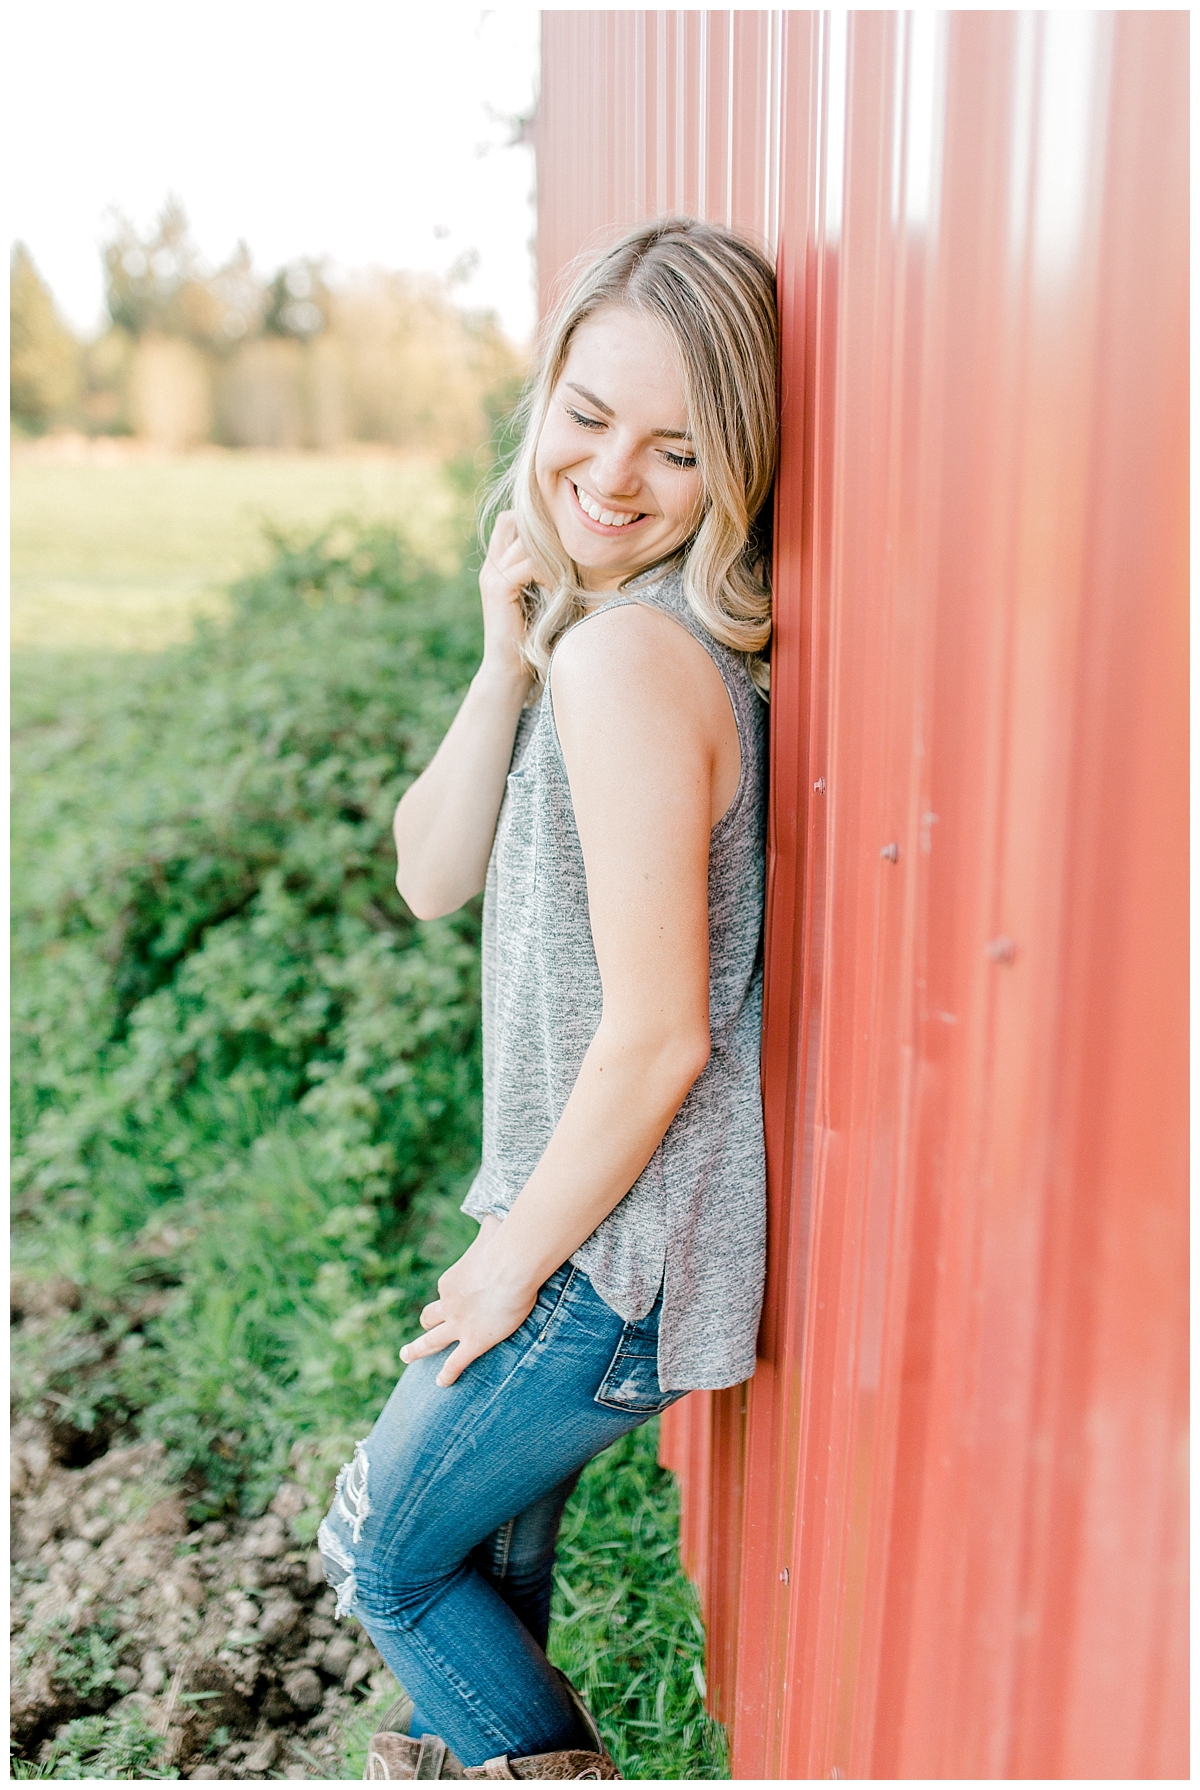 Sunset Senior Session with Horse | Senior Session Inspiration Session | Horse Photo Session | Pacific Northwest Light and Airy Wedding and Portrait Photographer | Emma Rose Company | Kindred Presets Senior.jpg